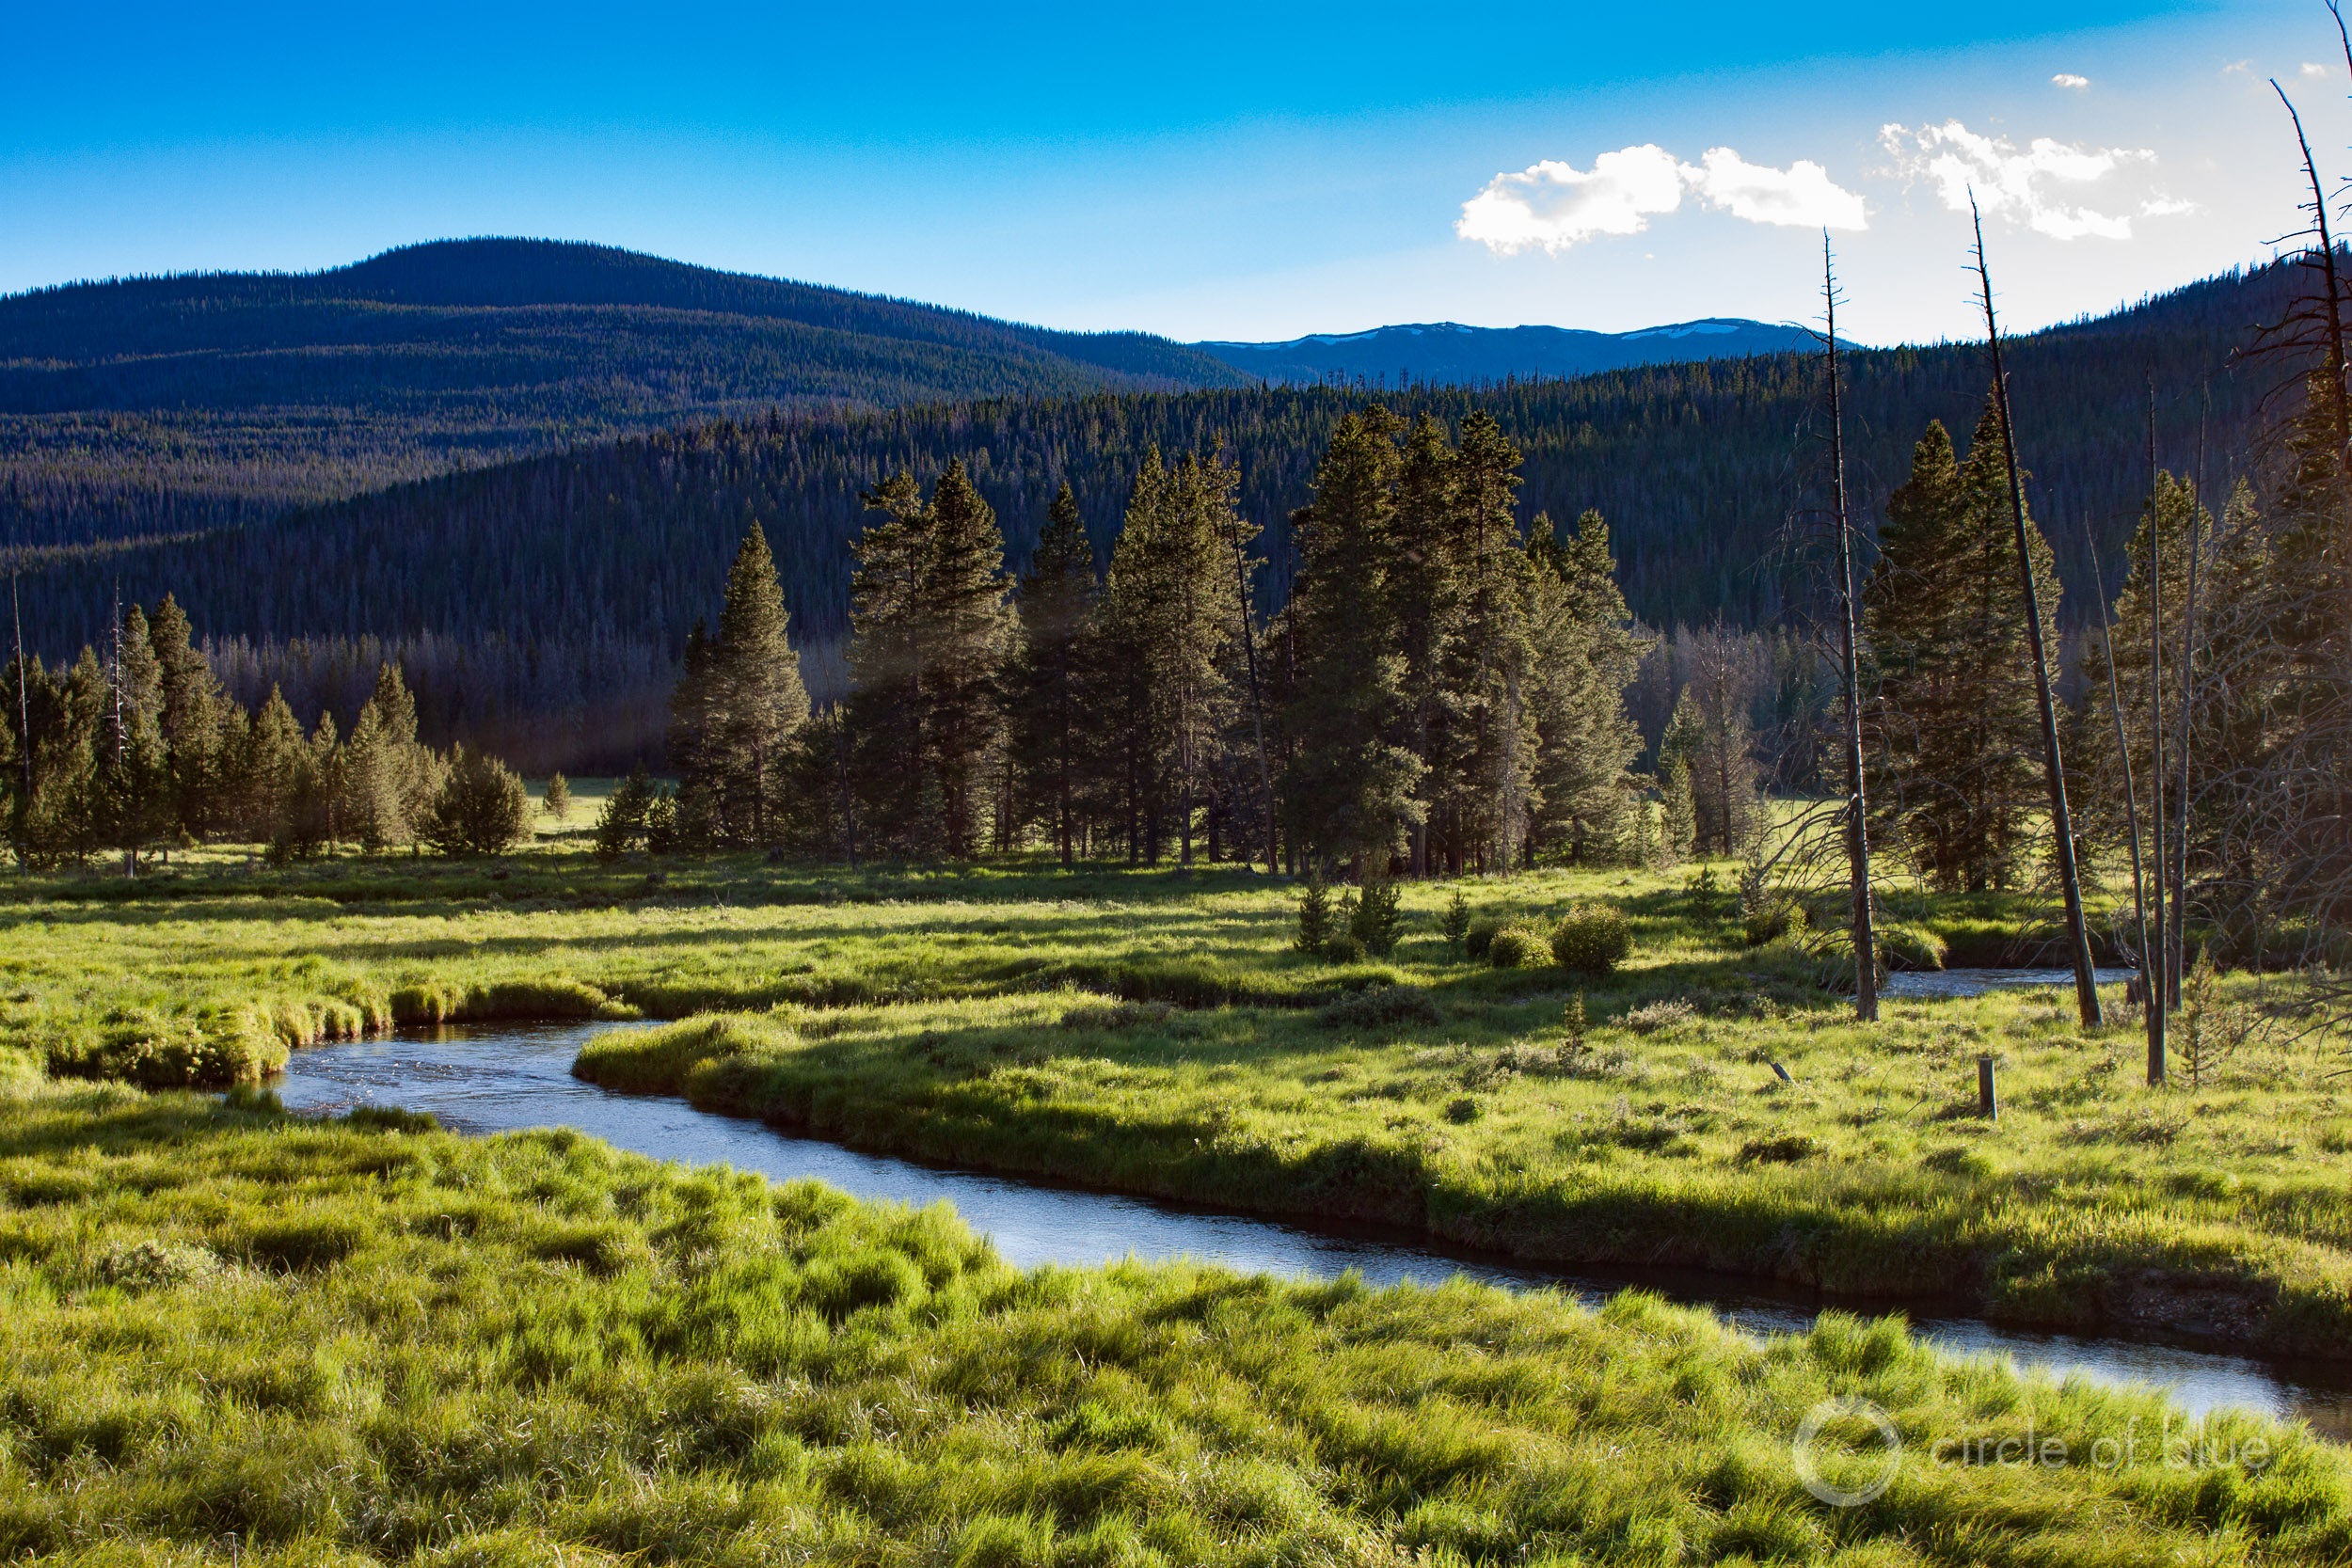 The Colorado River headwaters in Rocky Mountain National Park. Photo © Brett Walton / Circle of Blue